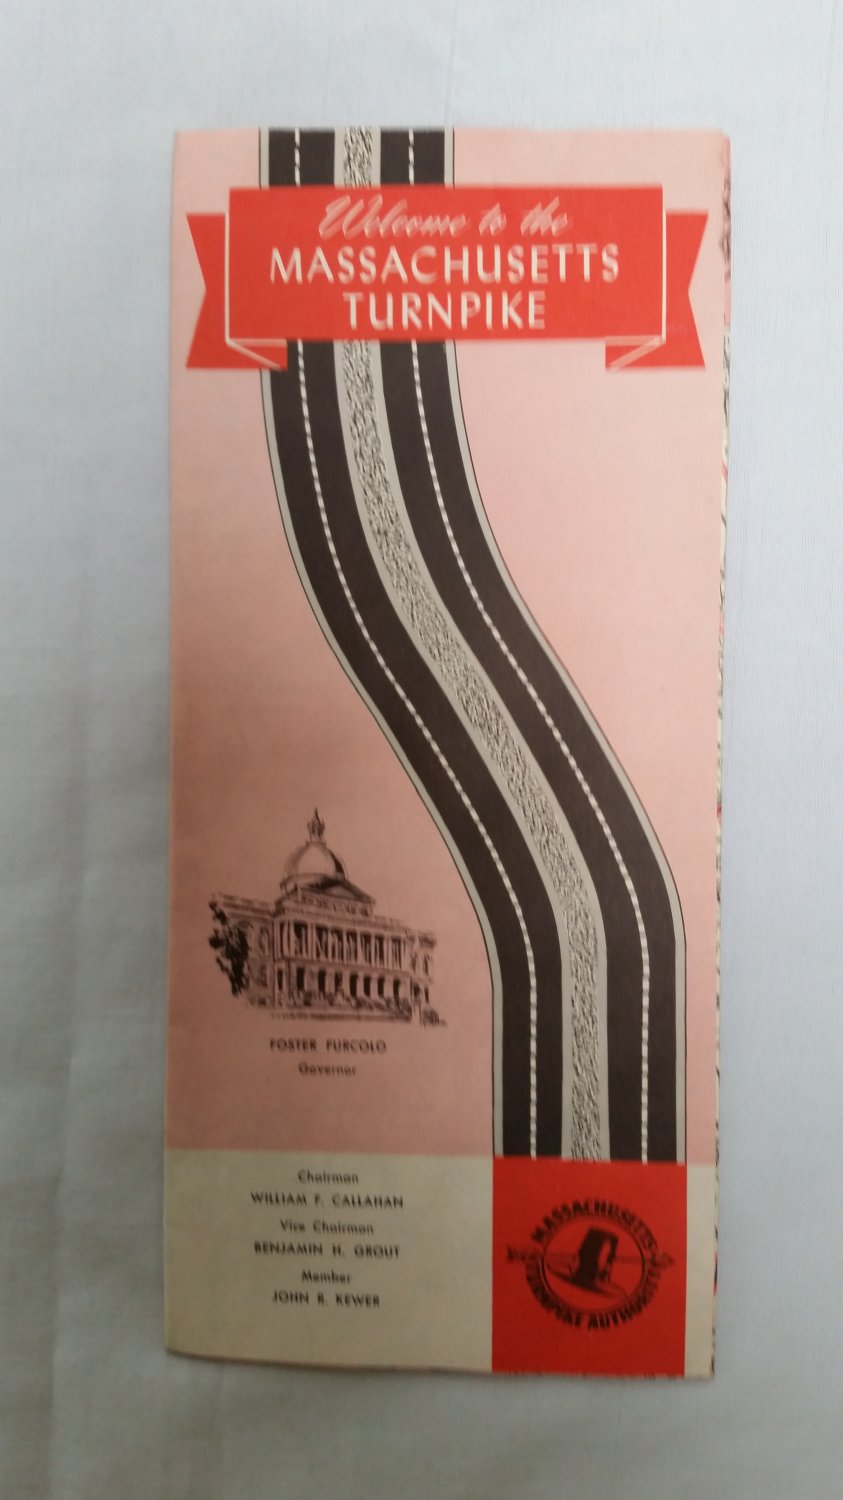 Vintage Massachusetts Turnpike maps and information